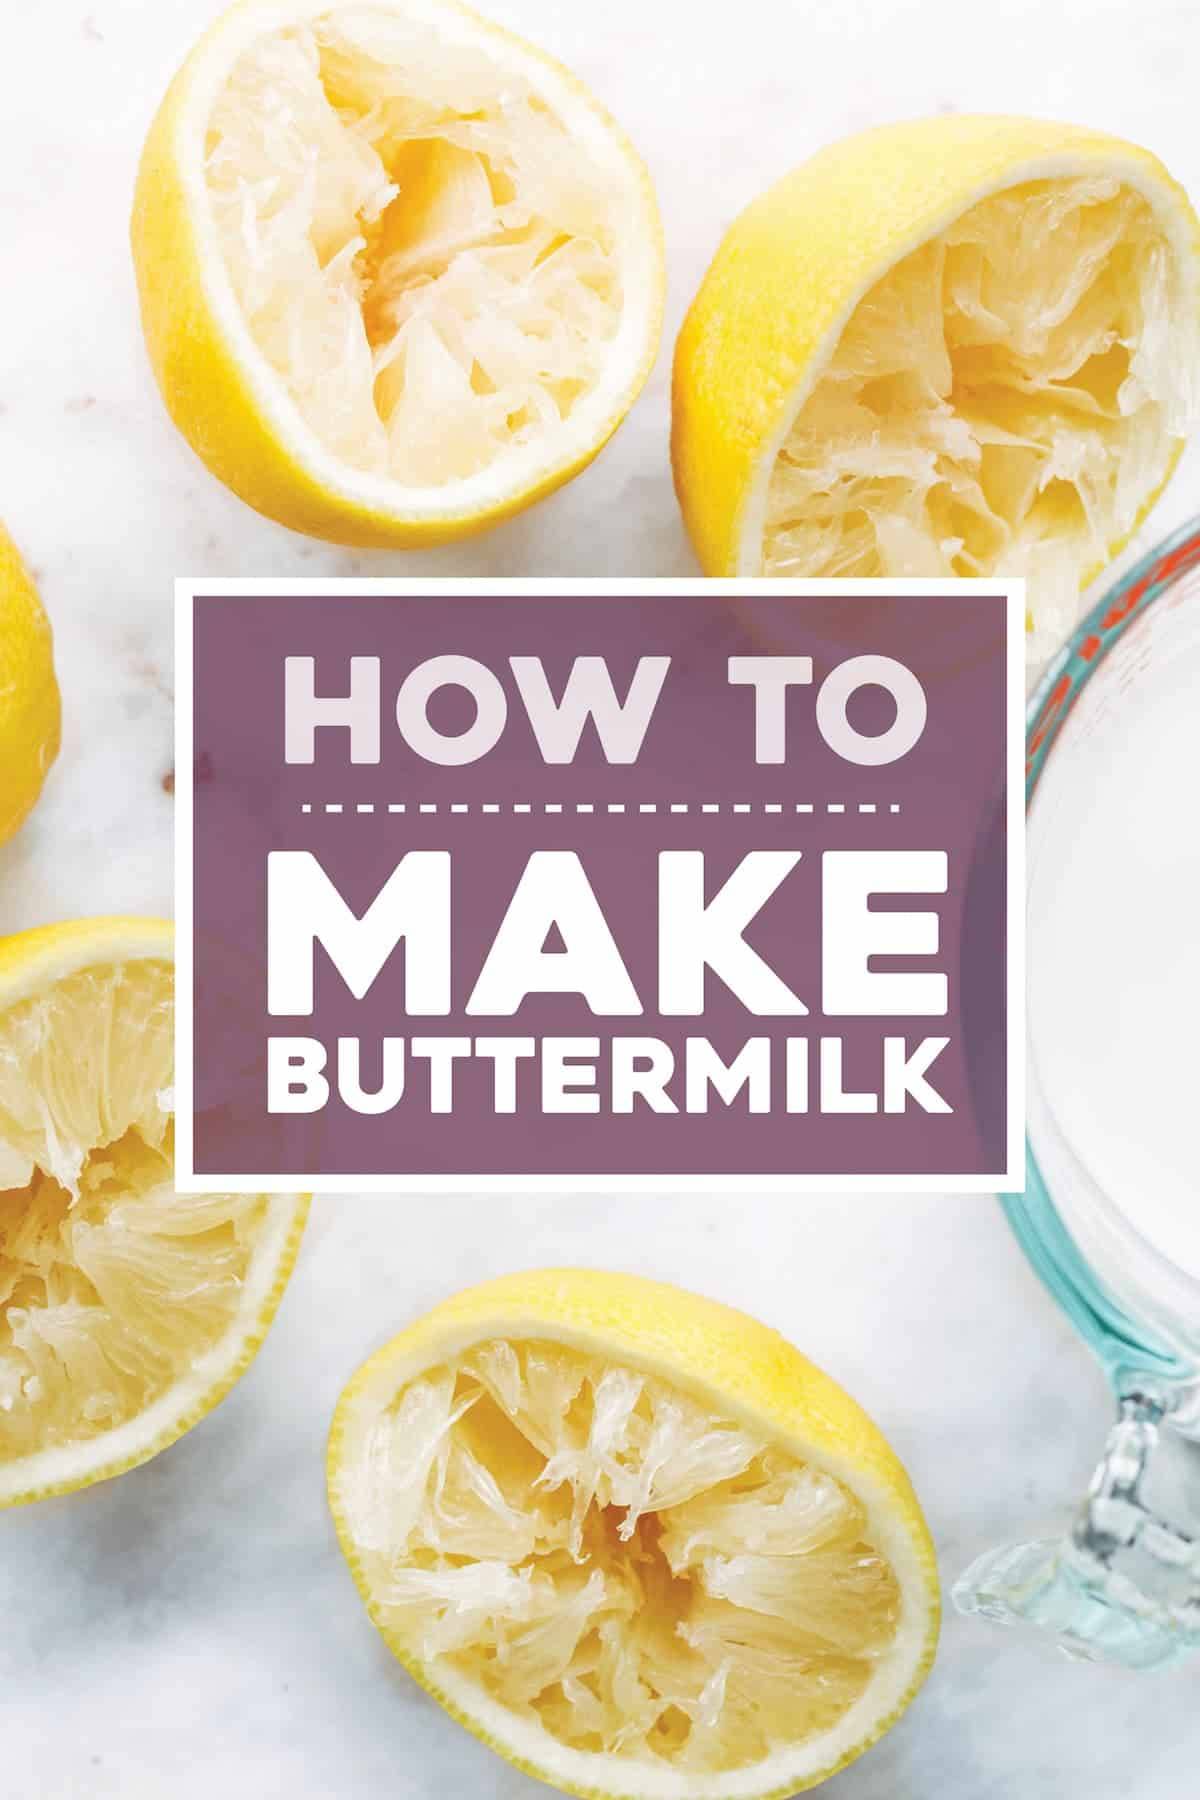 Unlock The Secret To Perfect Buttermilk: Learn How To Make It At Home